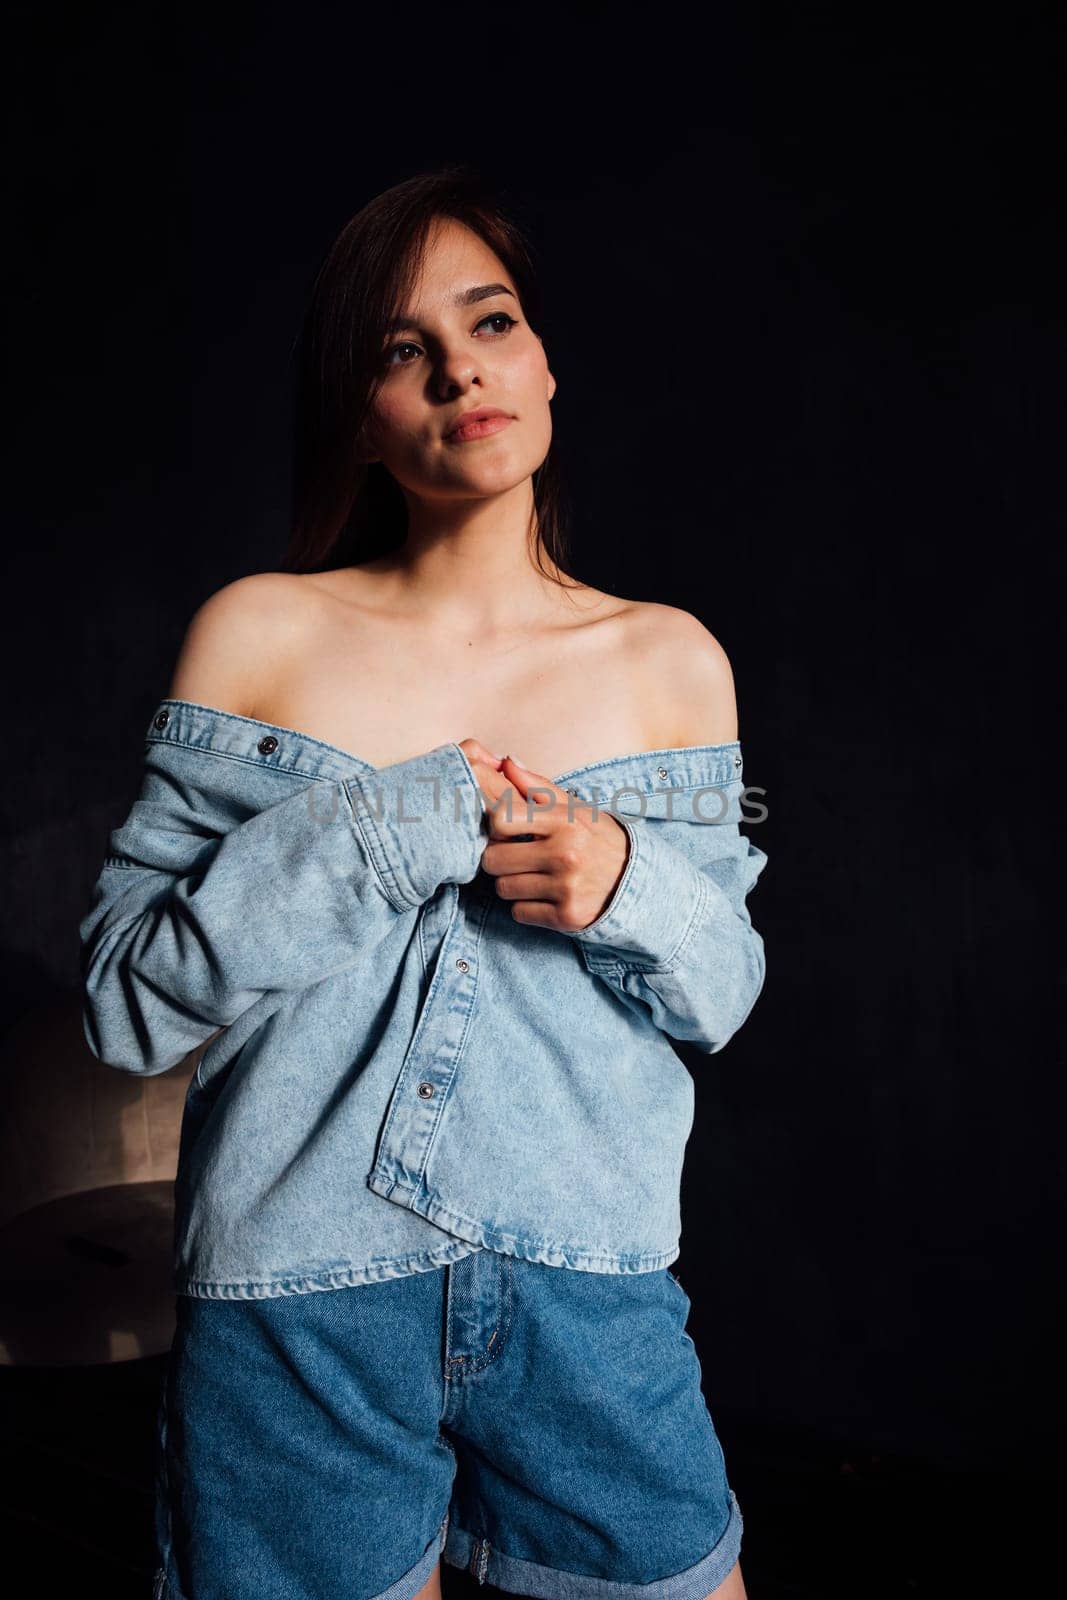 Portrait of a beautiful fashionable young woman in denim clothing by Simakov